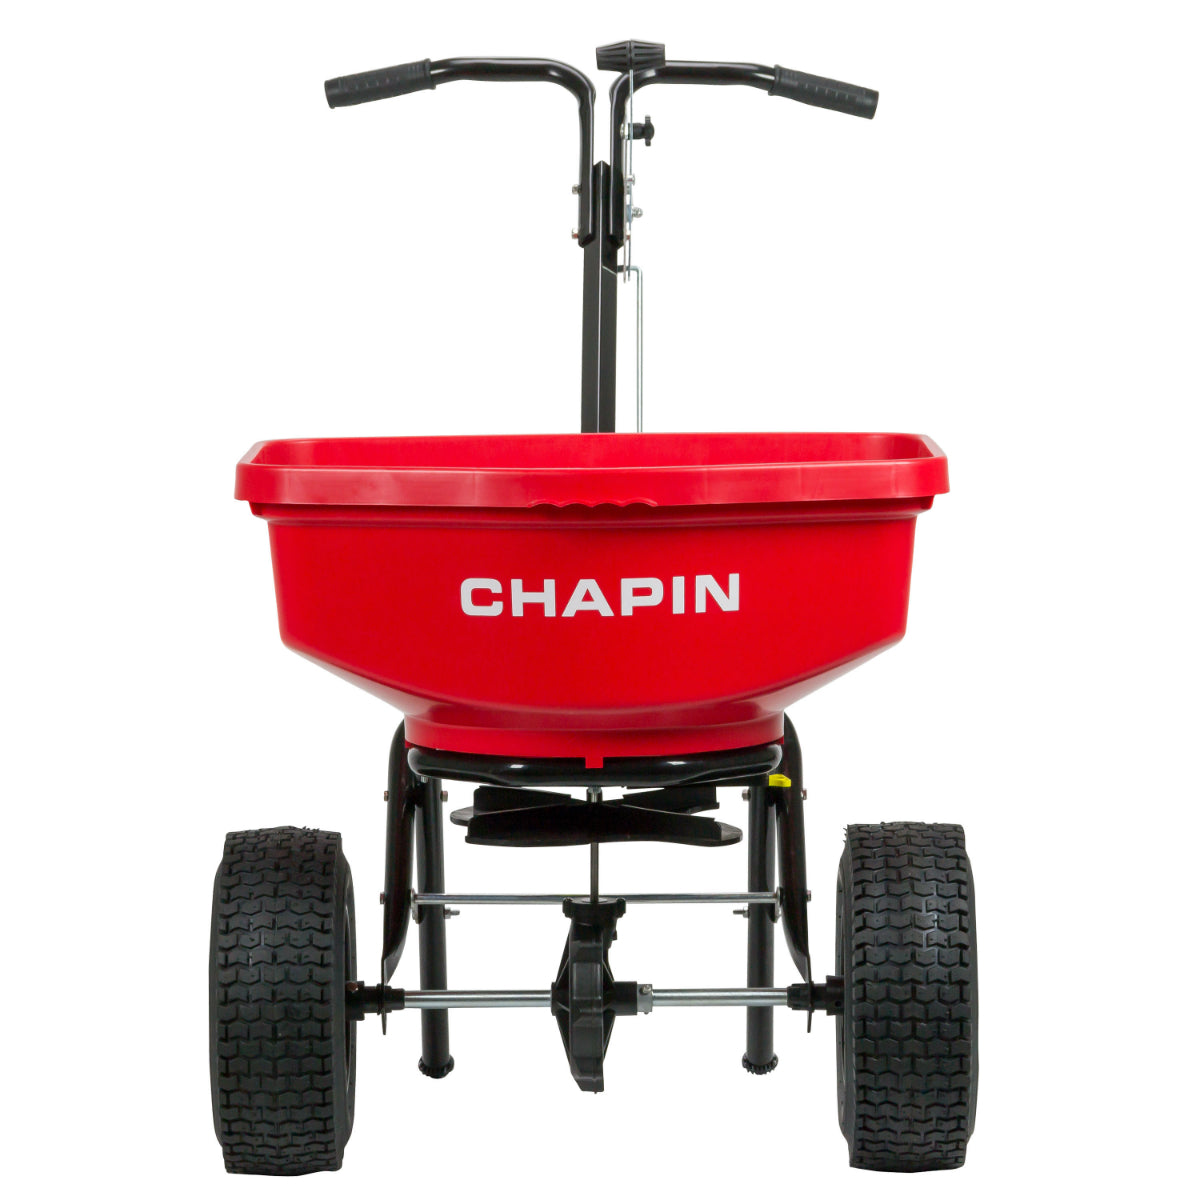 Chapin 8301C Contractor Turf Spreader with Rain Cover & Hopper Grate, 80-Pound